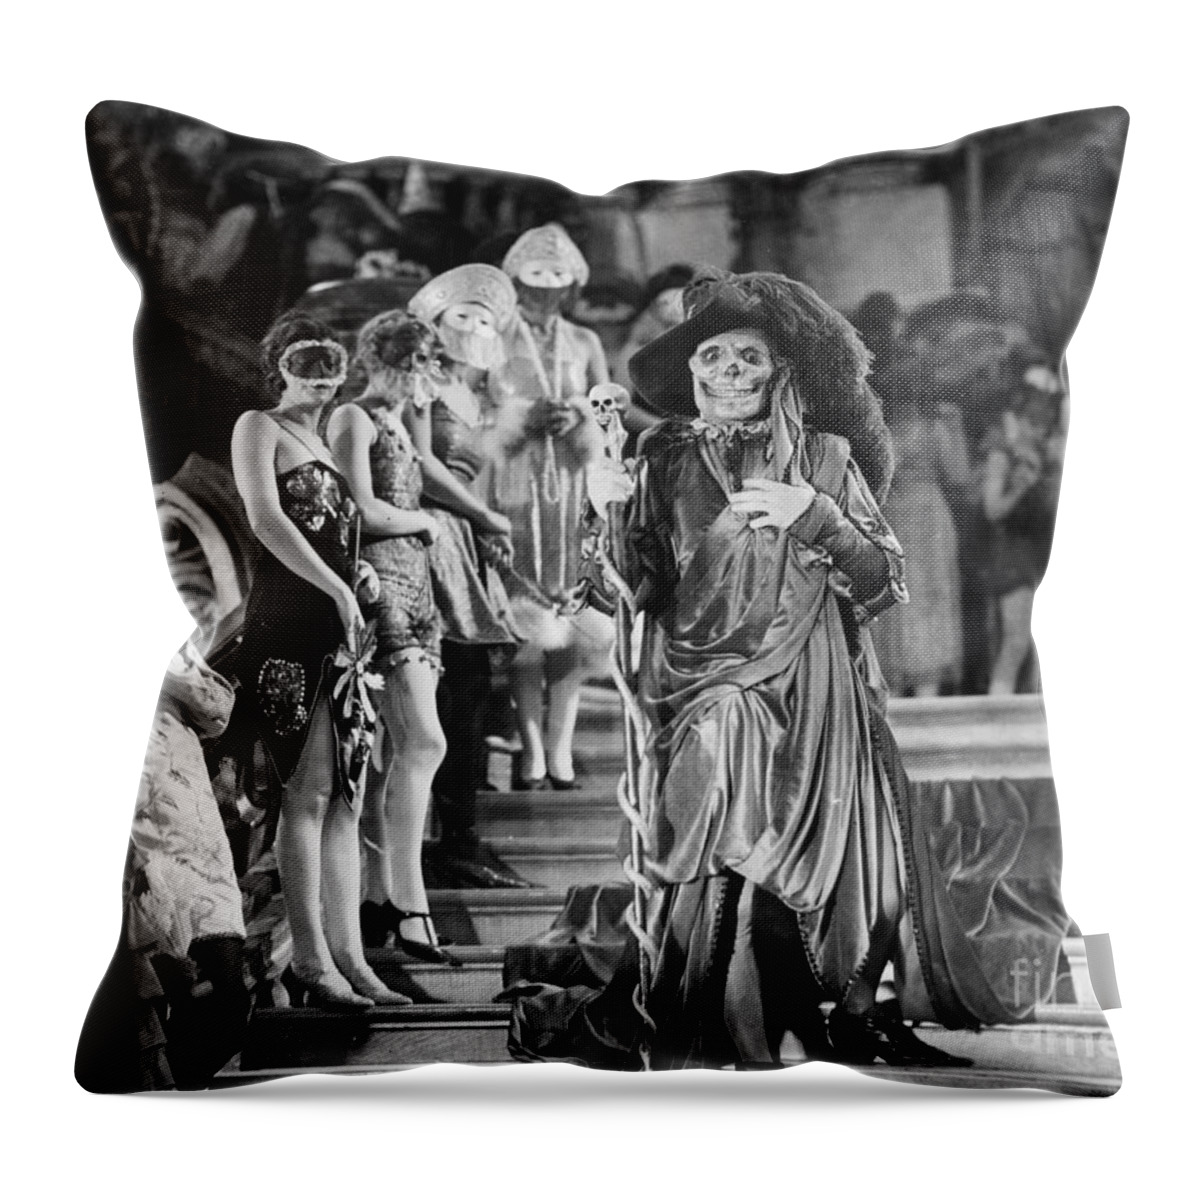 1925 Throw Pillow featuring the photograph Phantom Of The Opera, 1925 by Granger